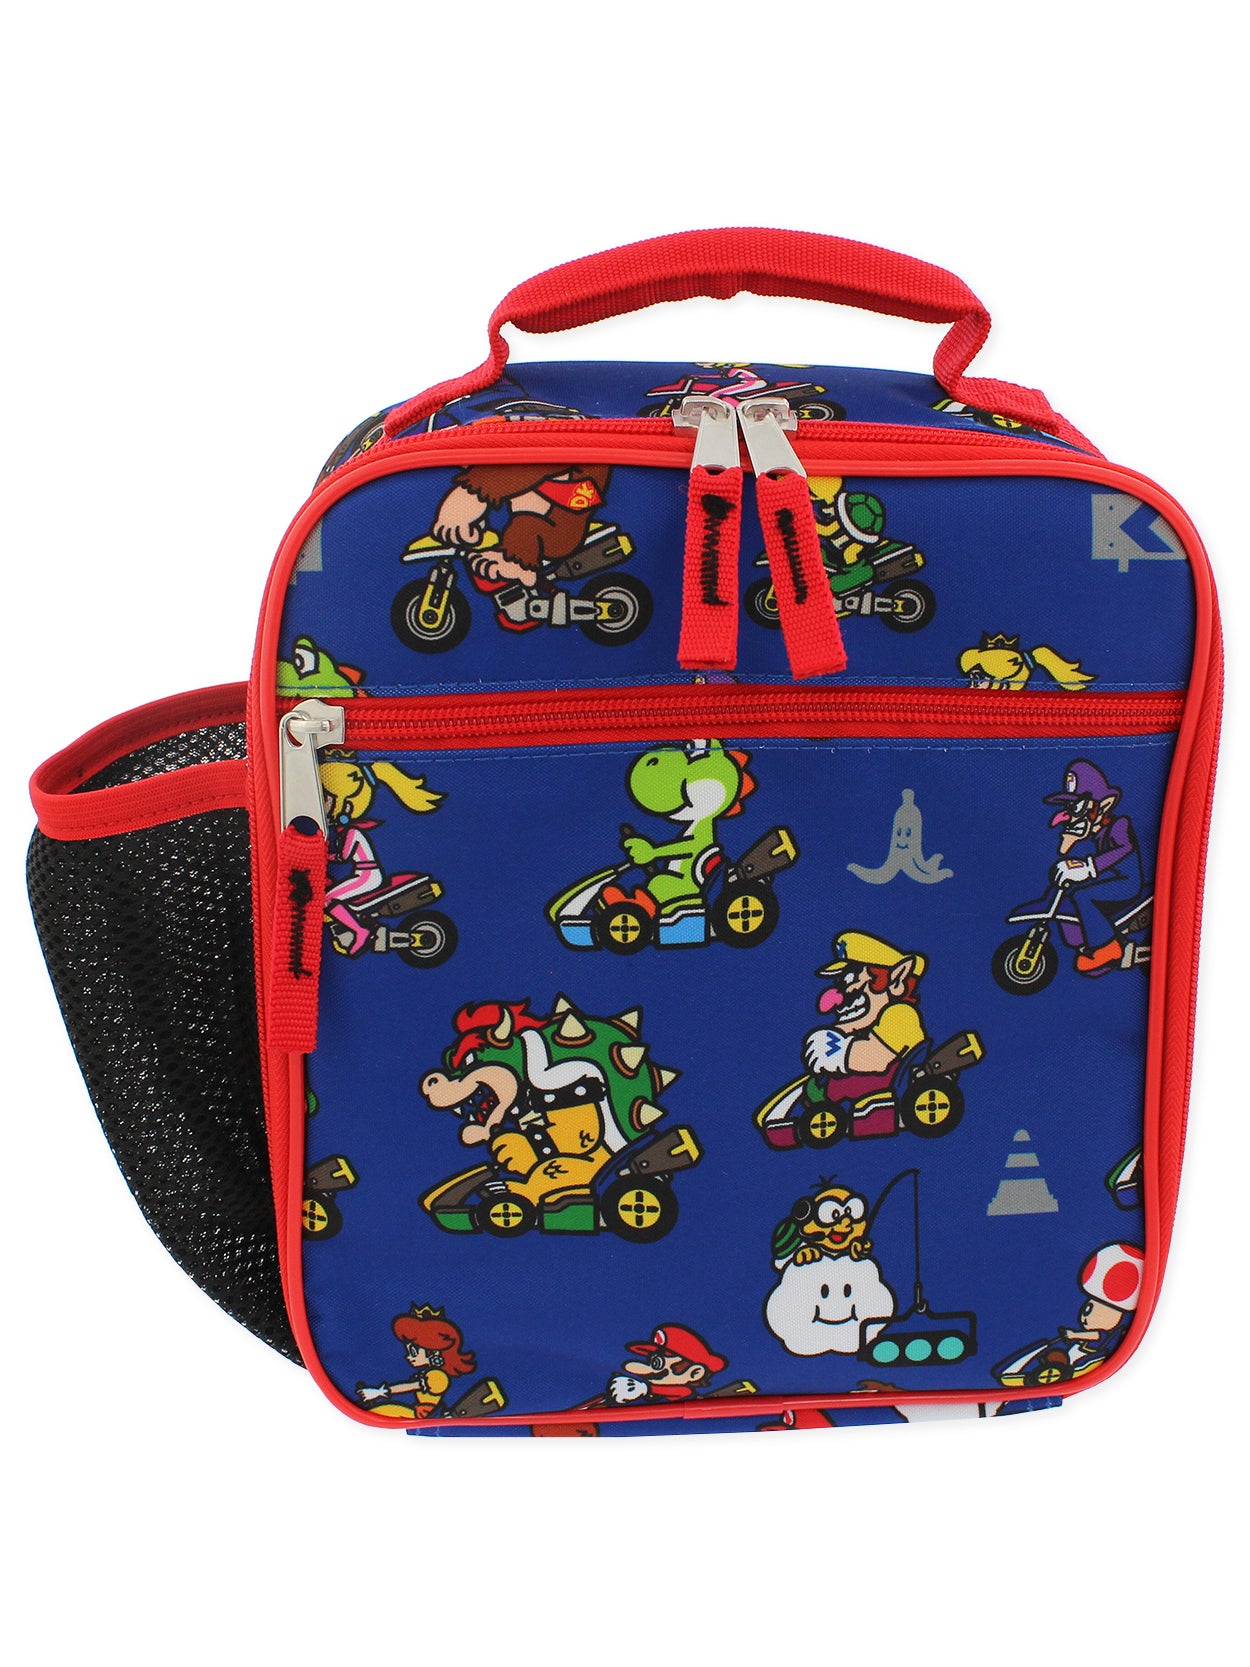 Super Mario Lunch Box Soft Kit Dual Compartment Insulated Cooler Characters